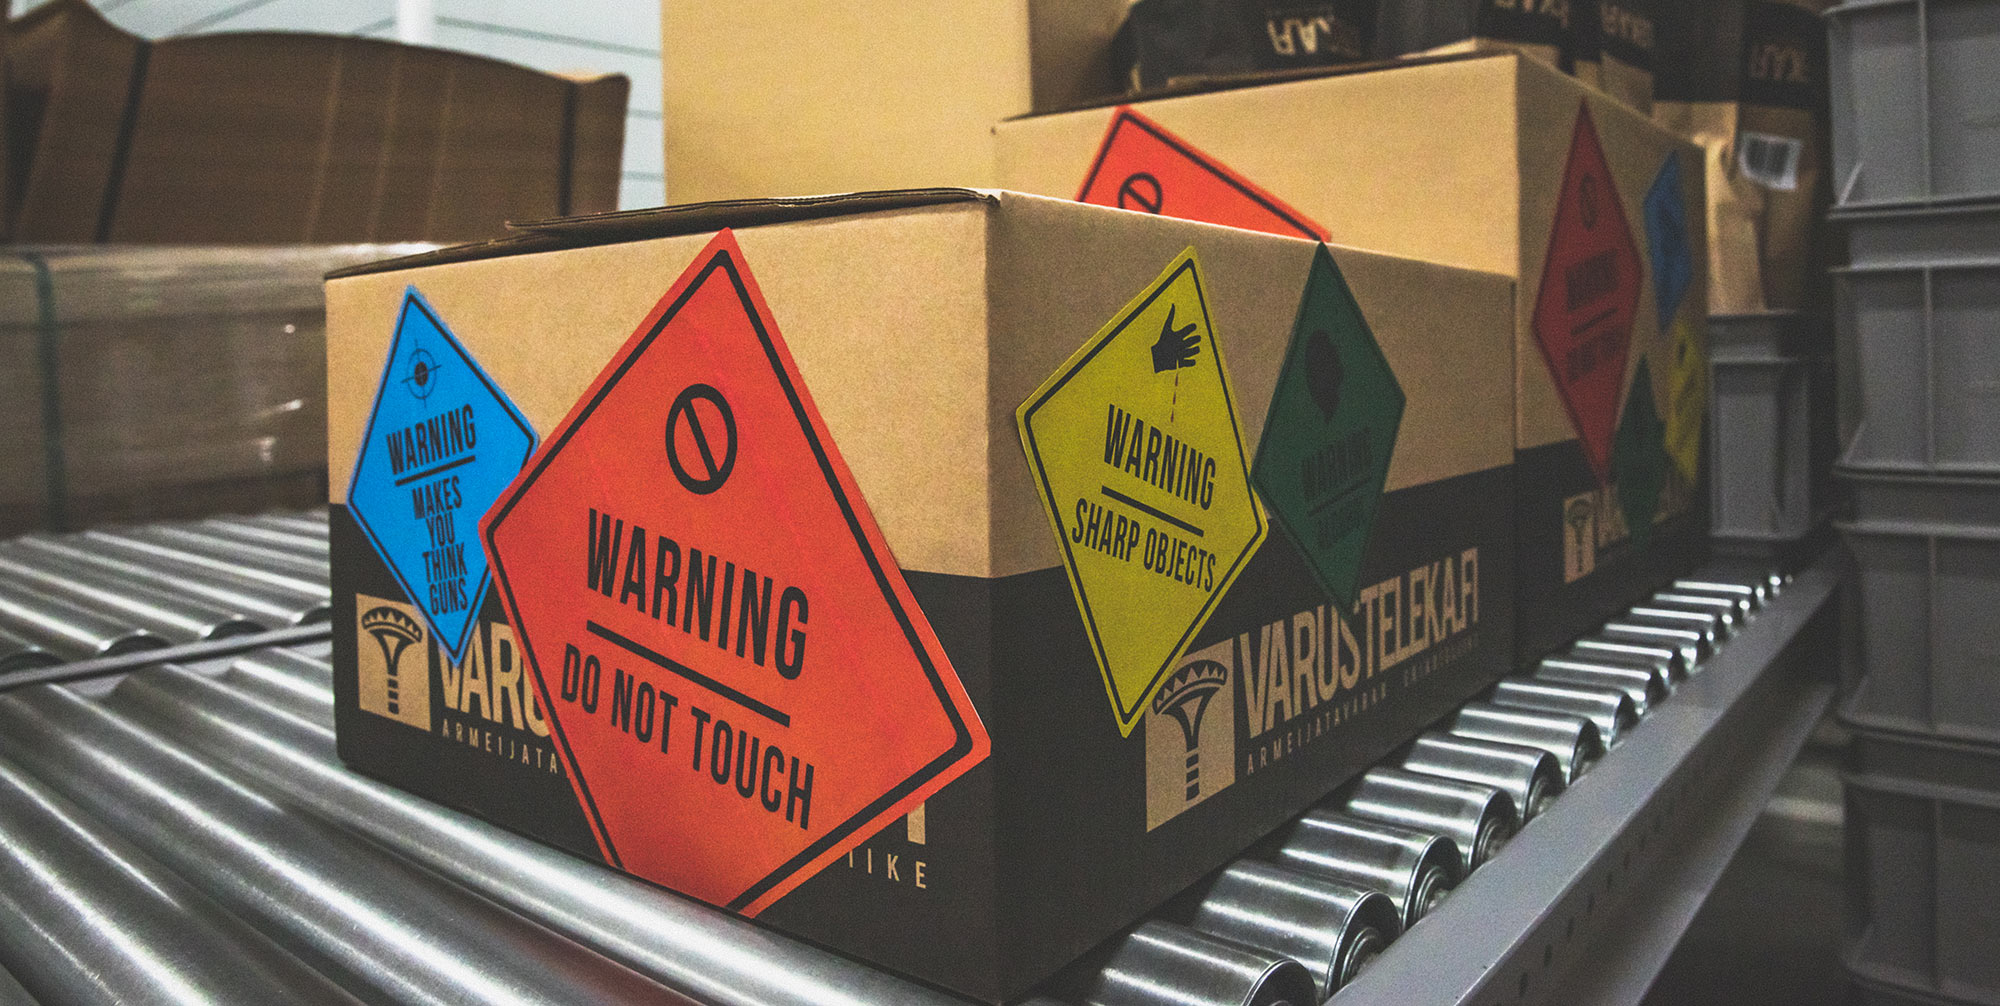 Varusteleka boxes on a conveyor belt with different colored warning stickers on them.